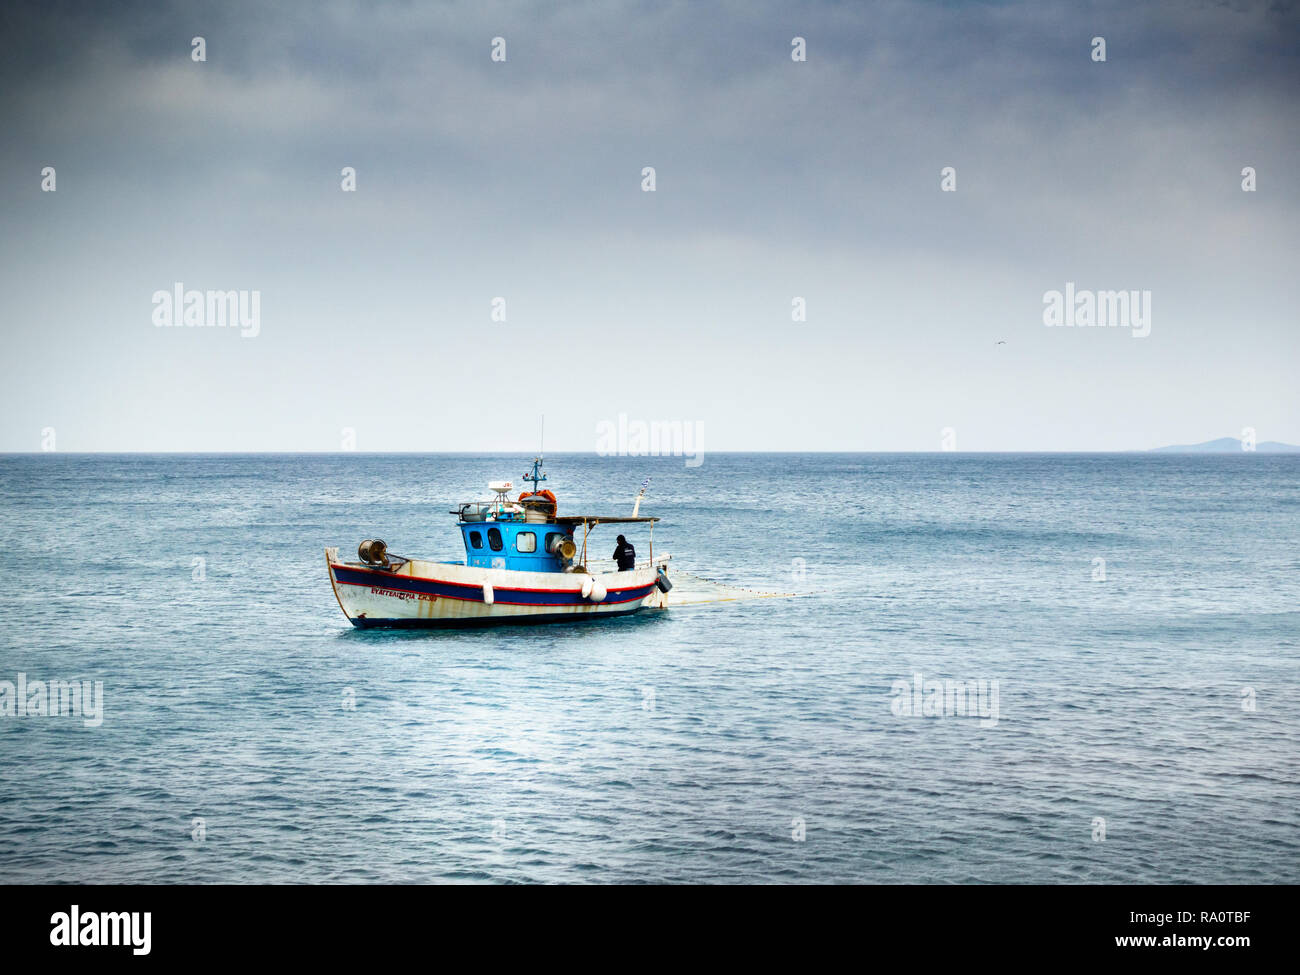 A small boat in the middle of the sea Crete Greece Europe Stock Photo